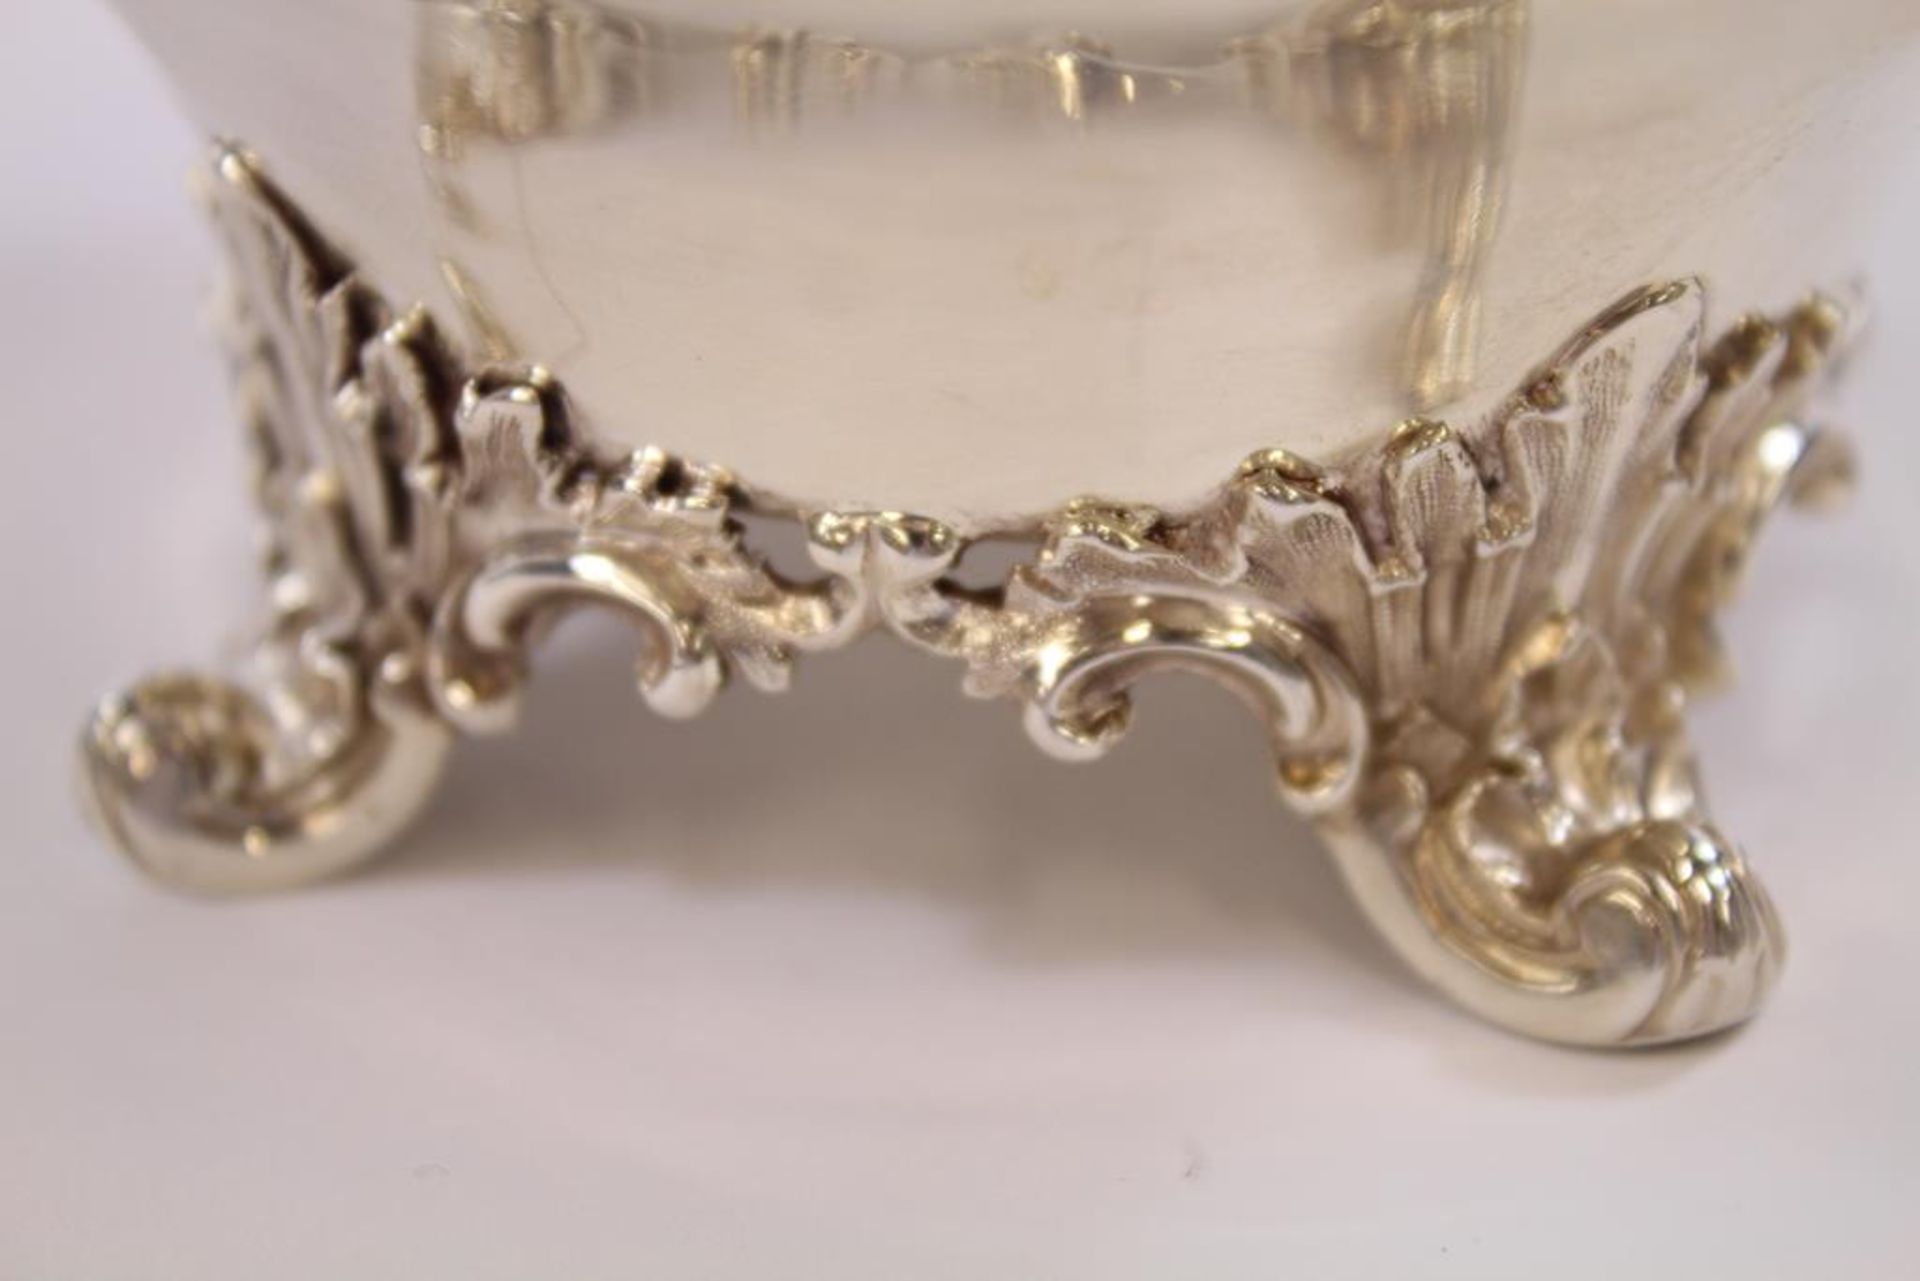 A William IV silver Cream Jug of bulbous form with scroll handle, ornate rim and curving supports ( - Image 2 of 2